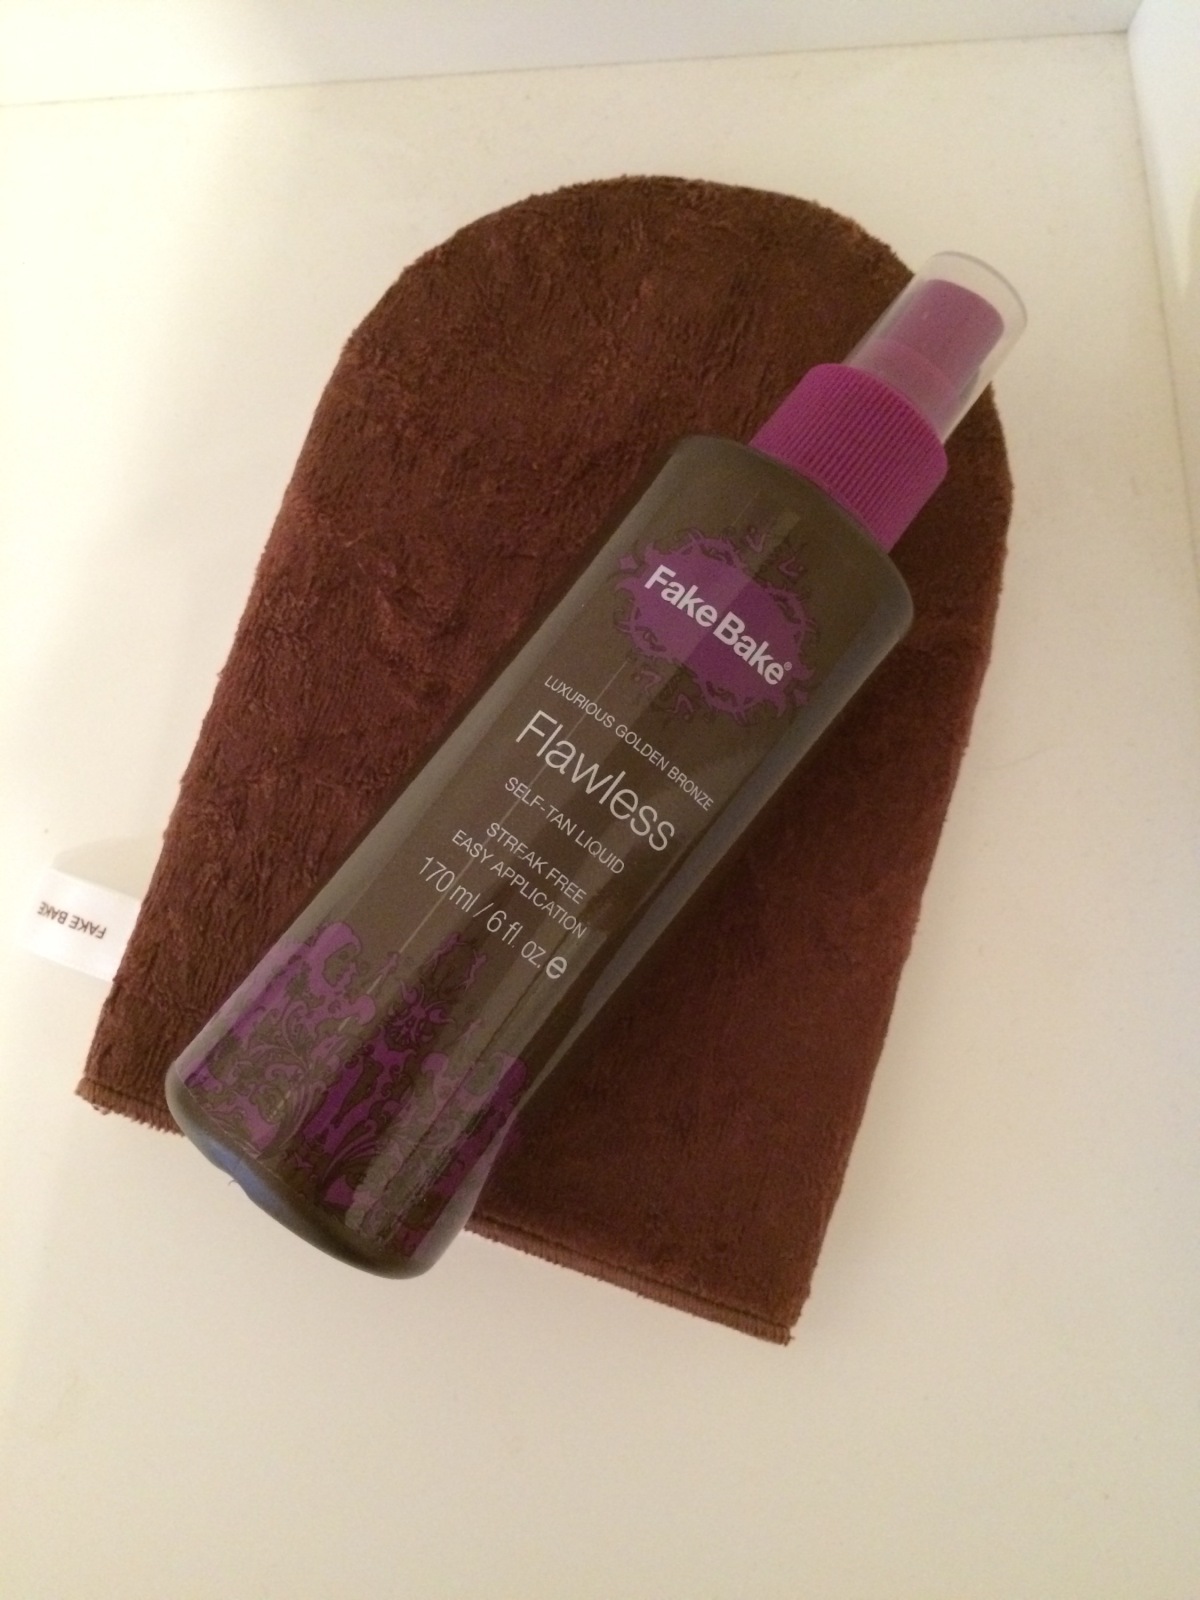 Quick Review:  Fake Bake Flawless Self Tanner